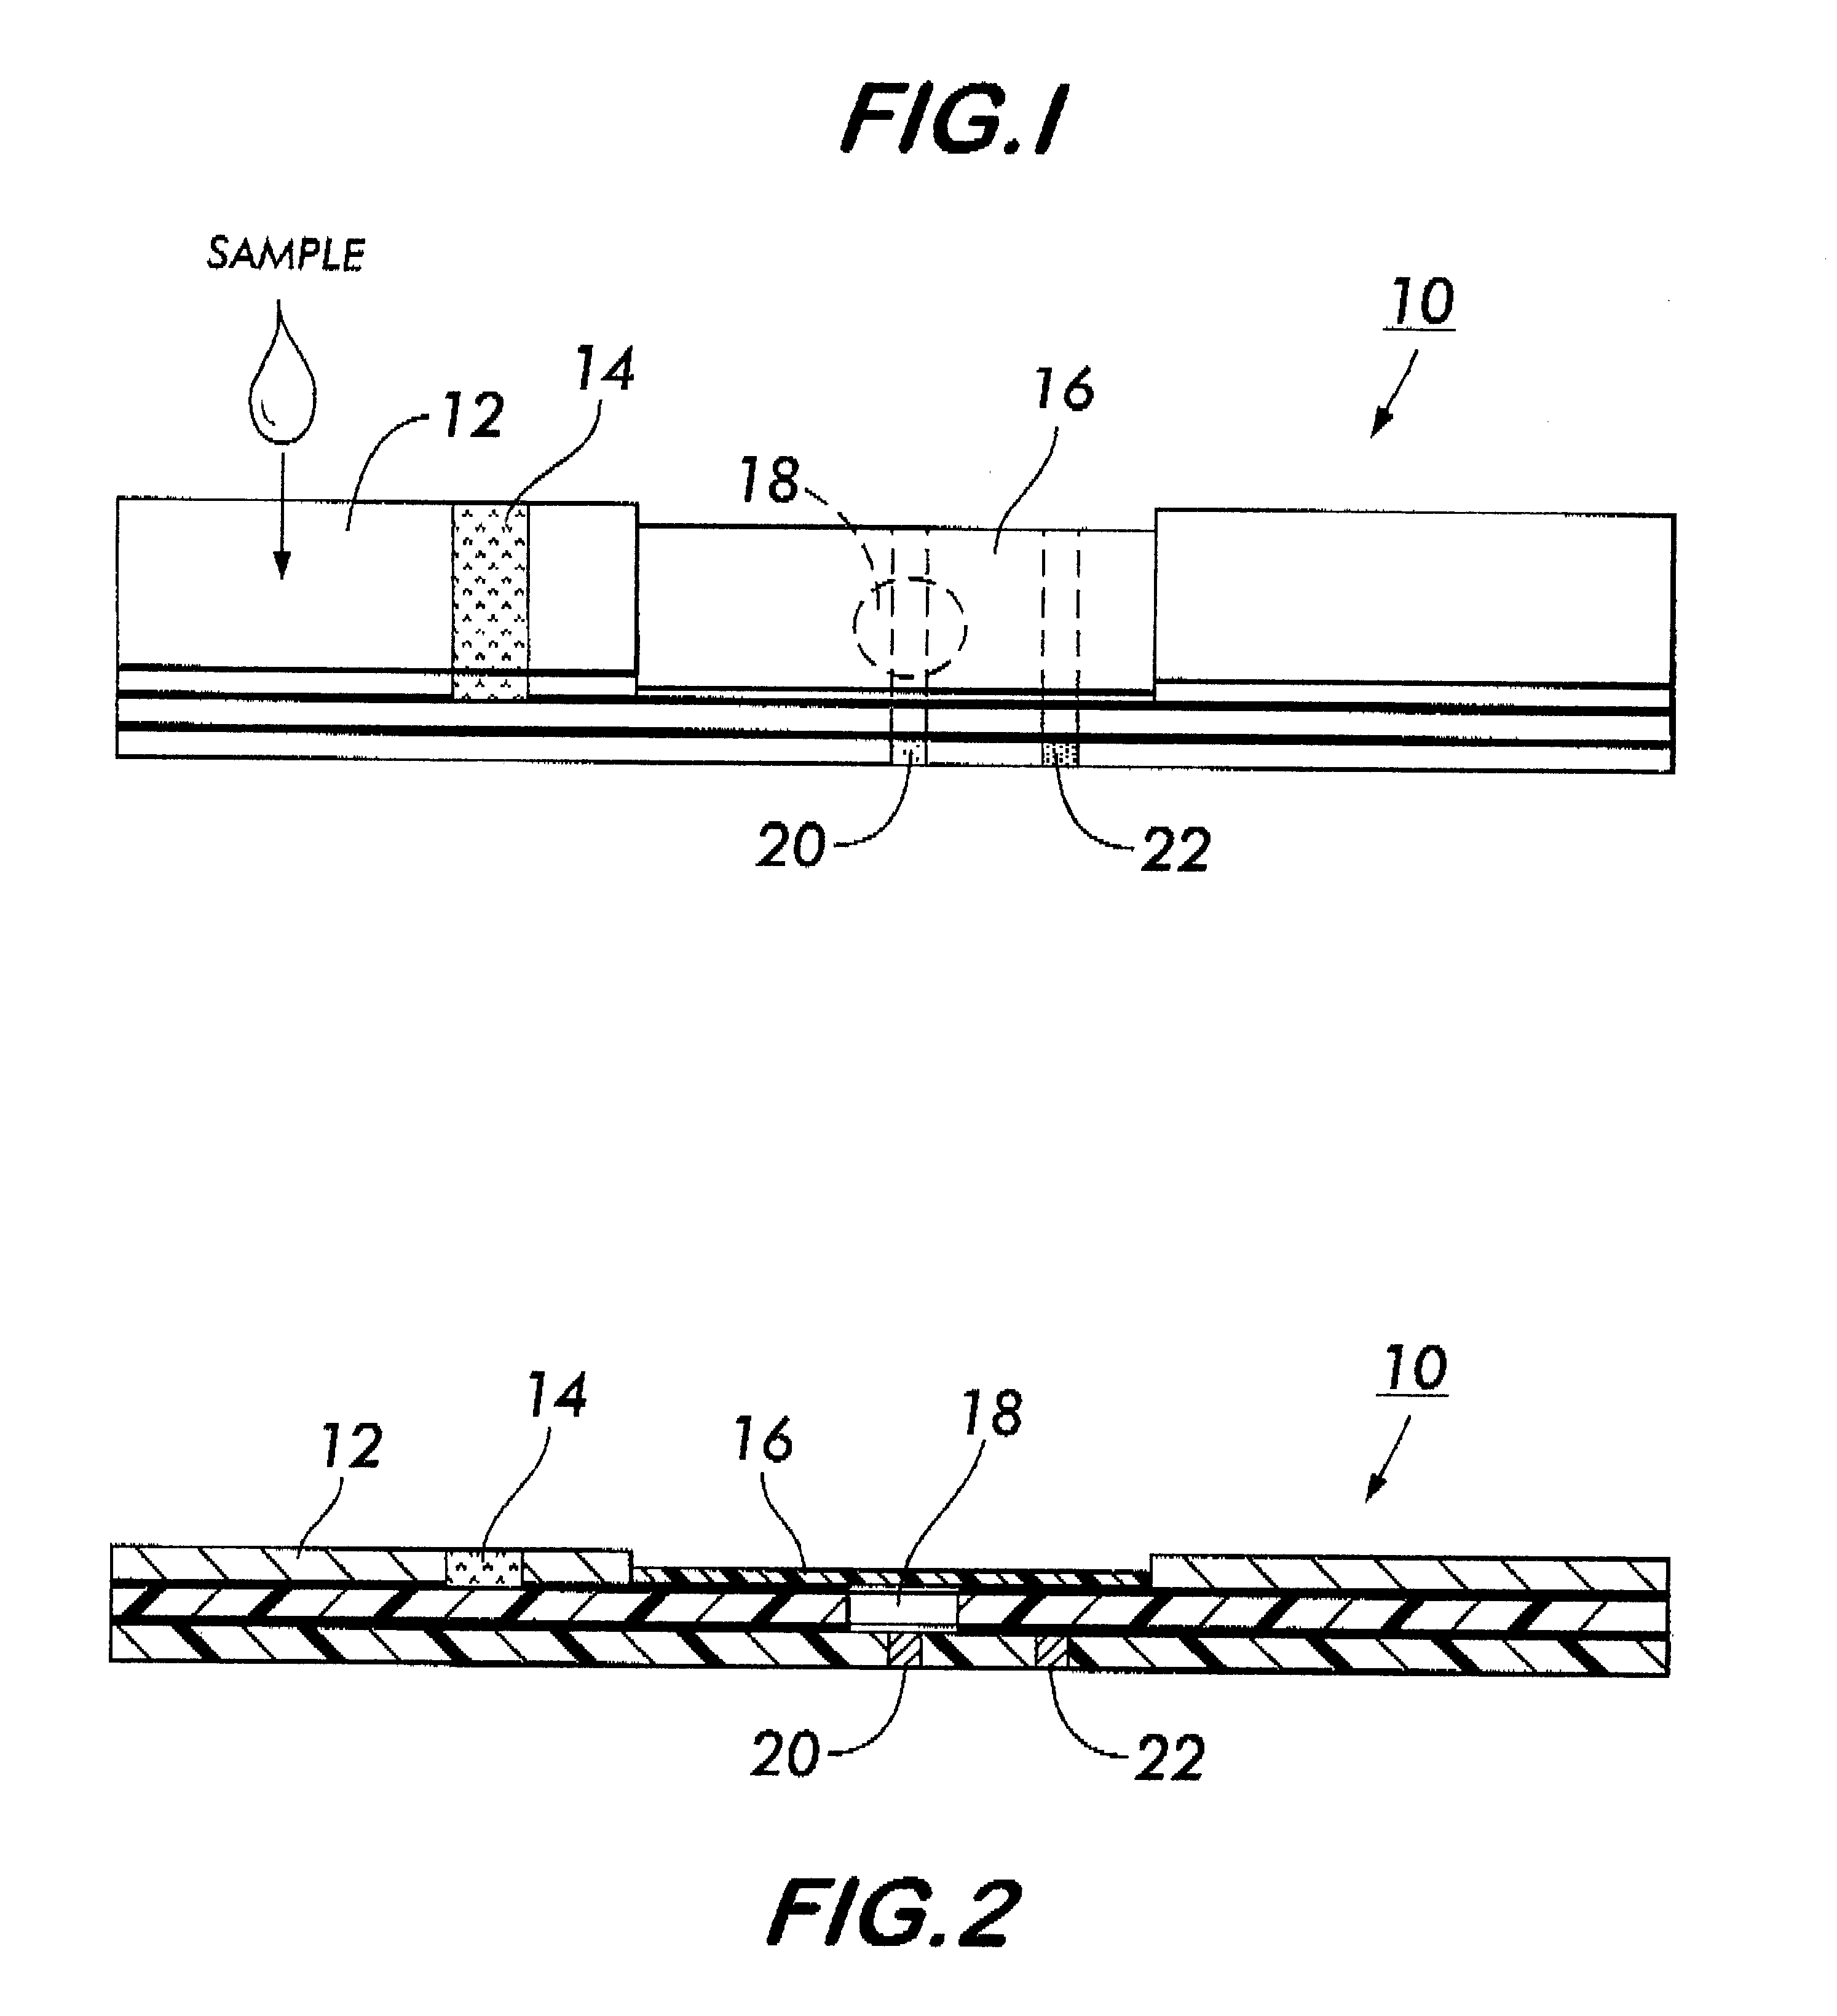 System for electrochemical quantitative analysis of analytes within a solid phase and affinity chromatographic test strip